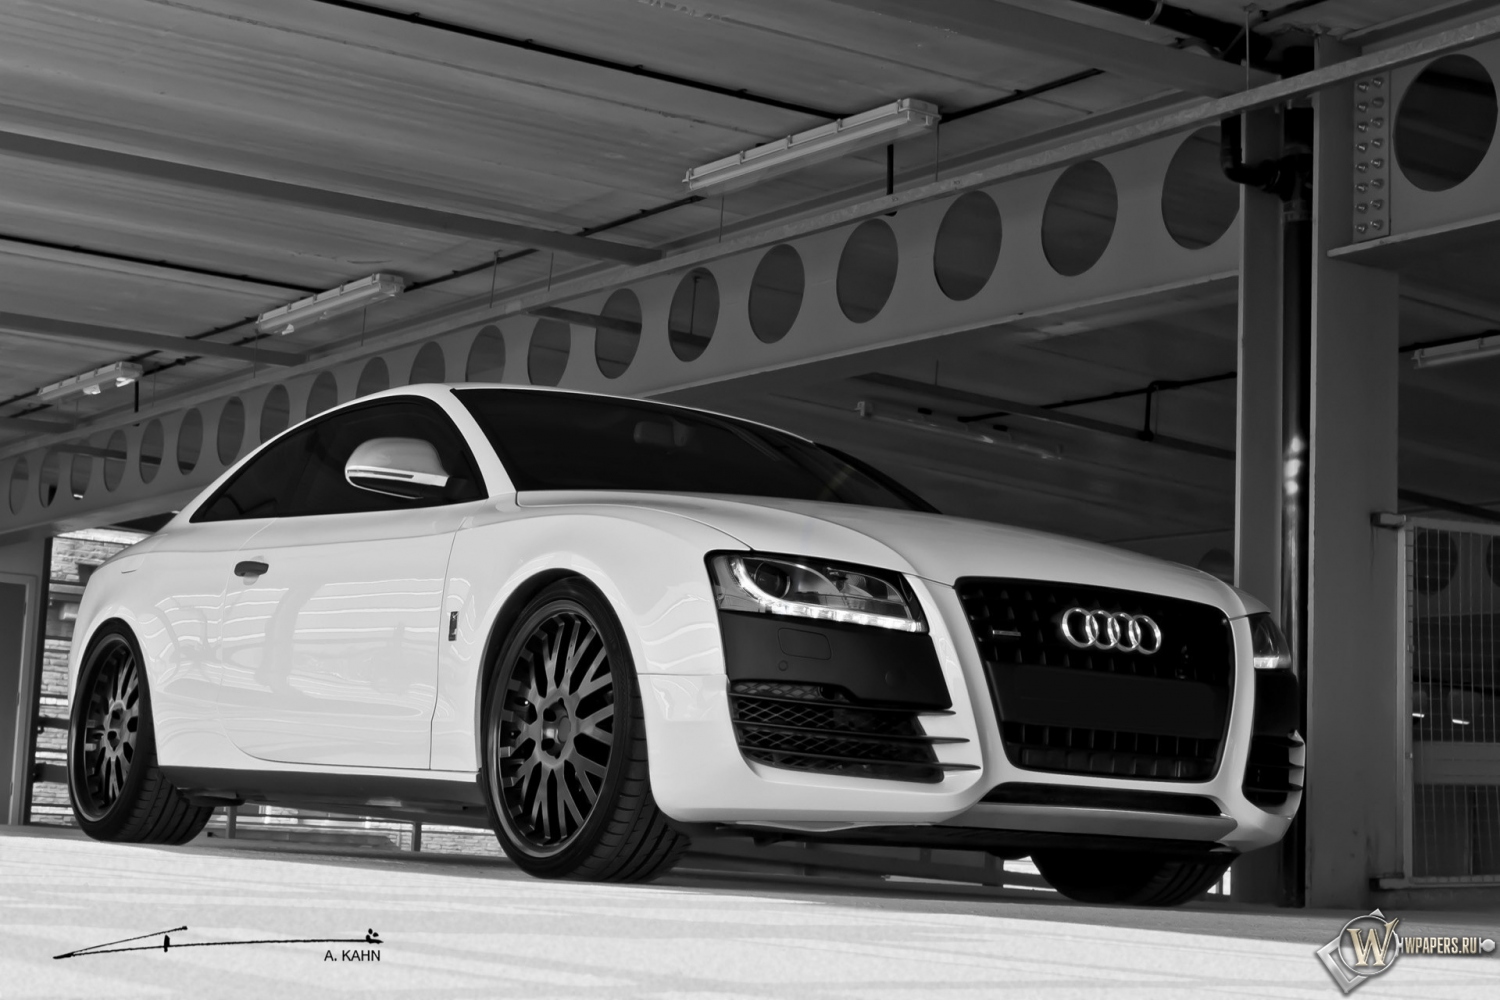 2011 Project Kahn Audi A5 Coupe Sport - Front Angle 1500x1000